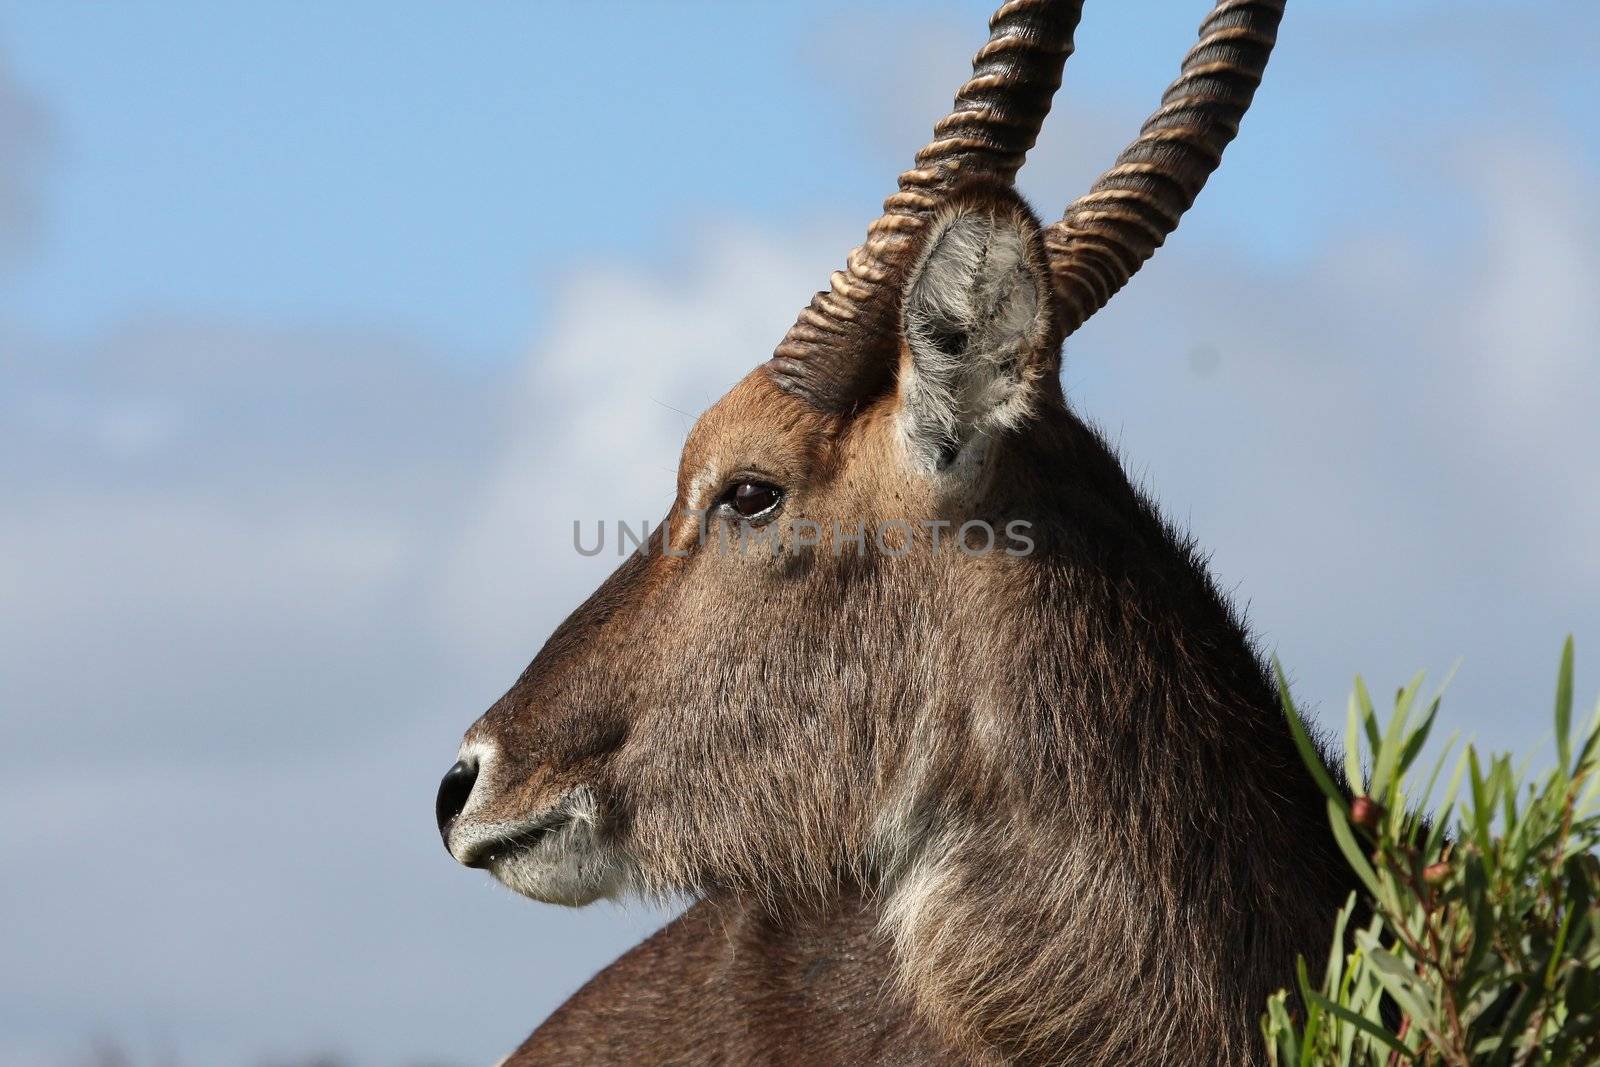 Portrait of a male waterbuck antelope from Africa